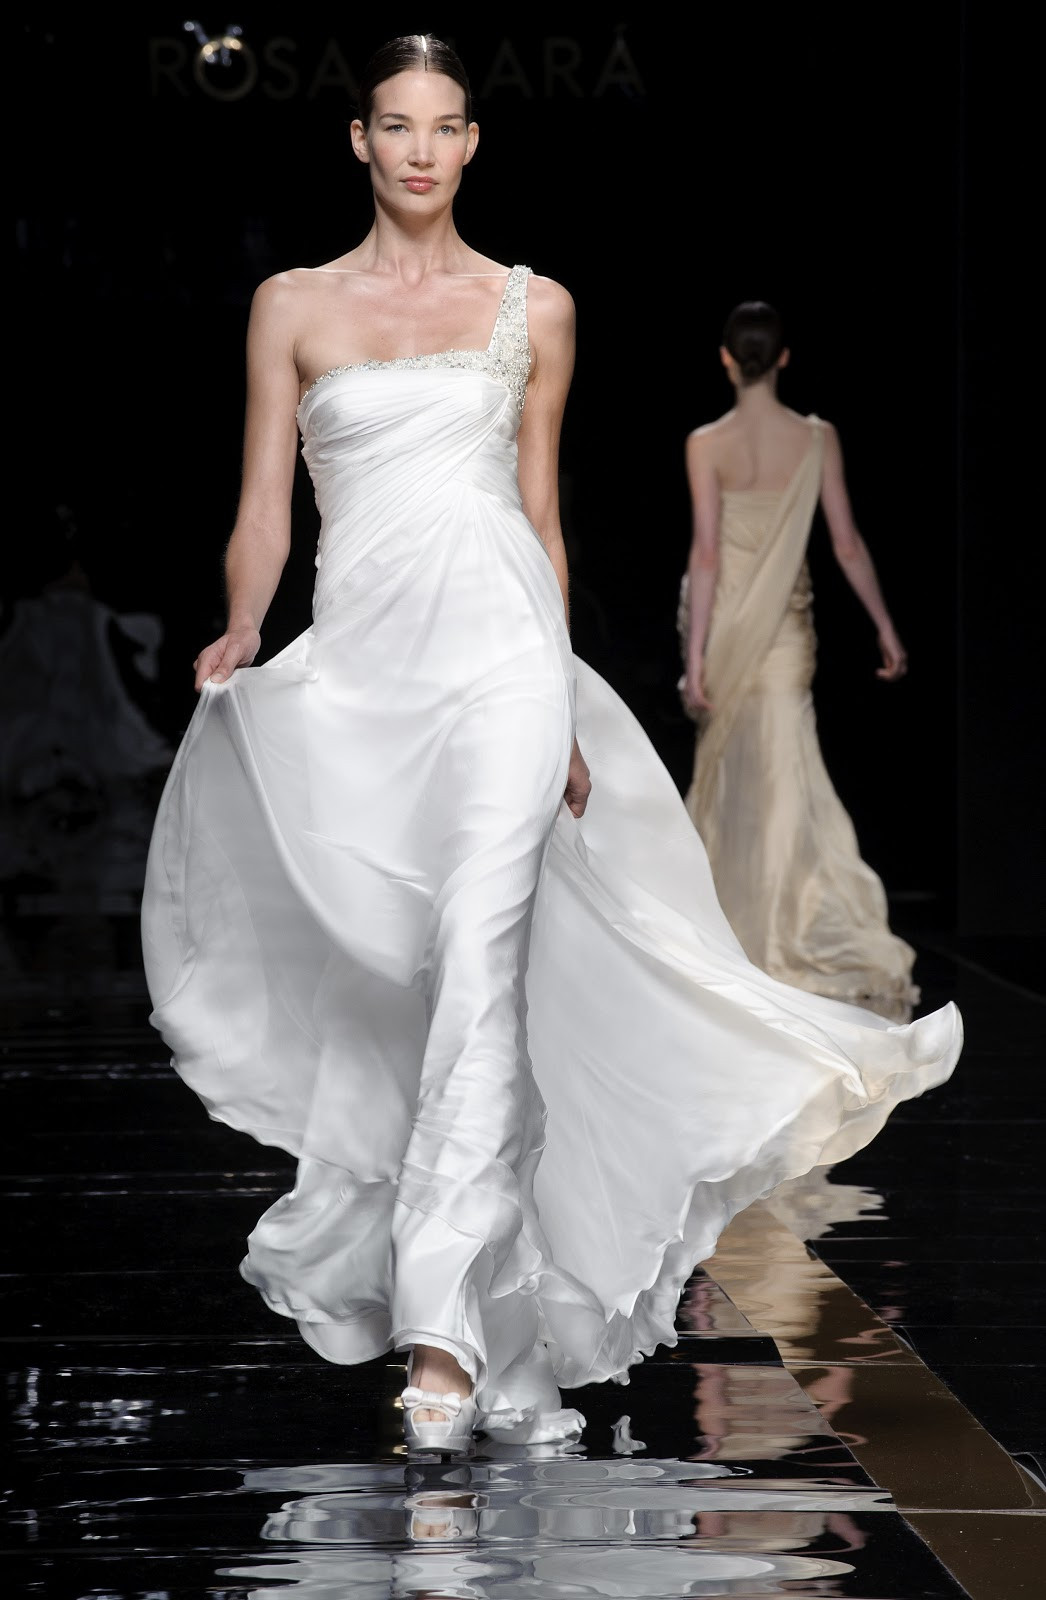 Atlanta Wedding Dresses
 The Wedding is Over How to Sell Your Wedding Dress on